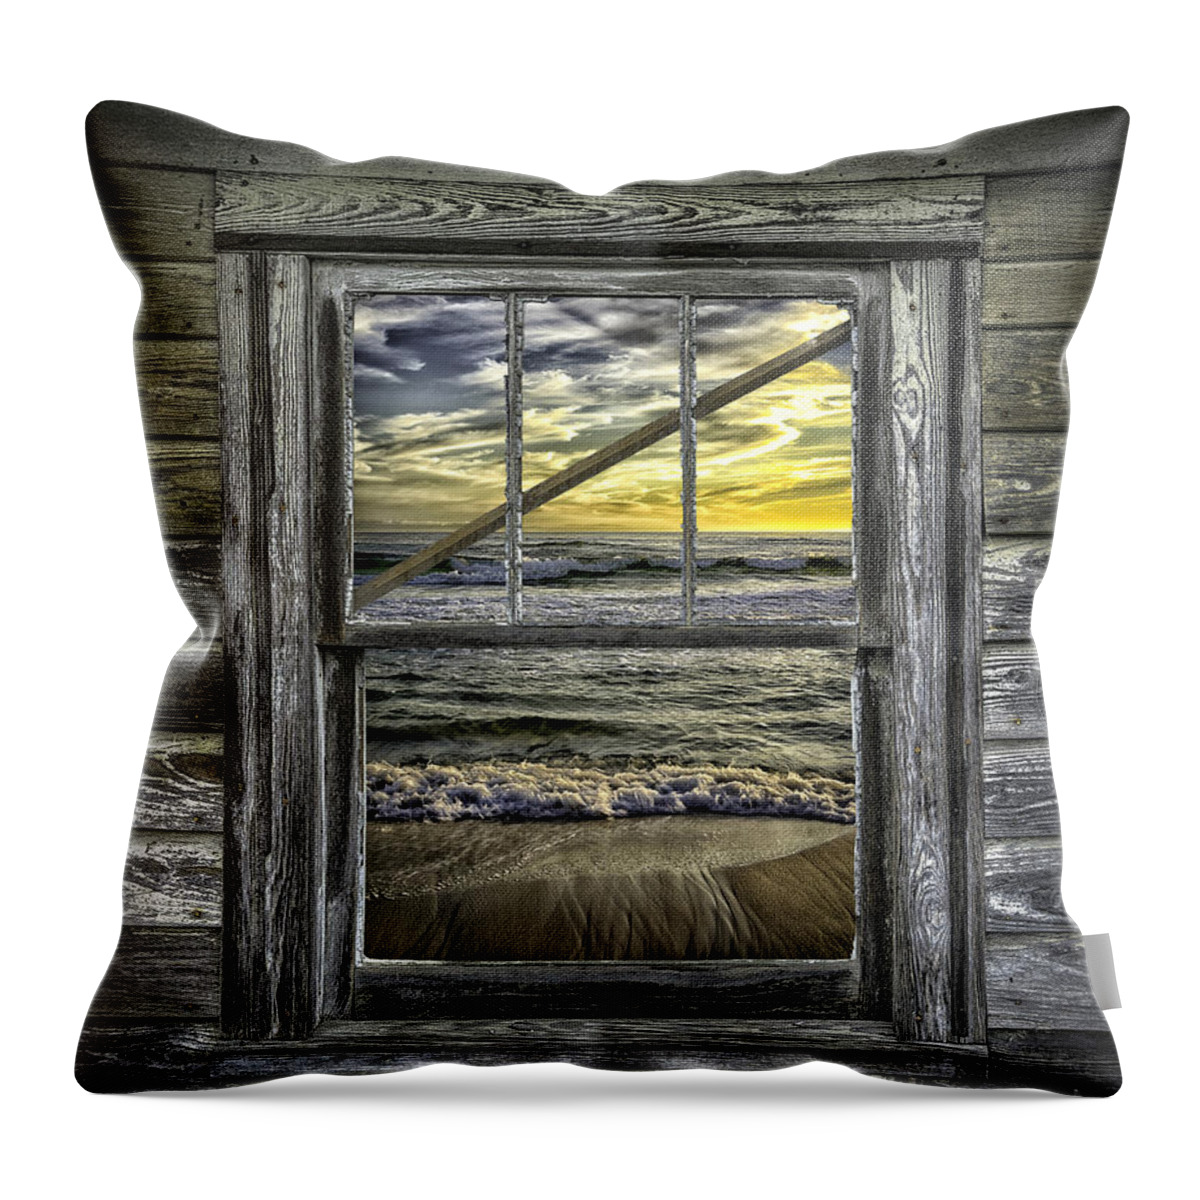 View Throw Pillow featuring the photograph View From Weathered Beach Cottage by Walt Foegelle